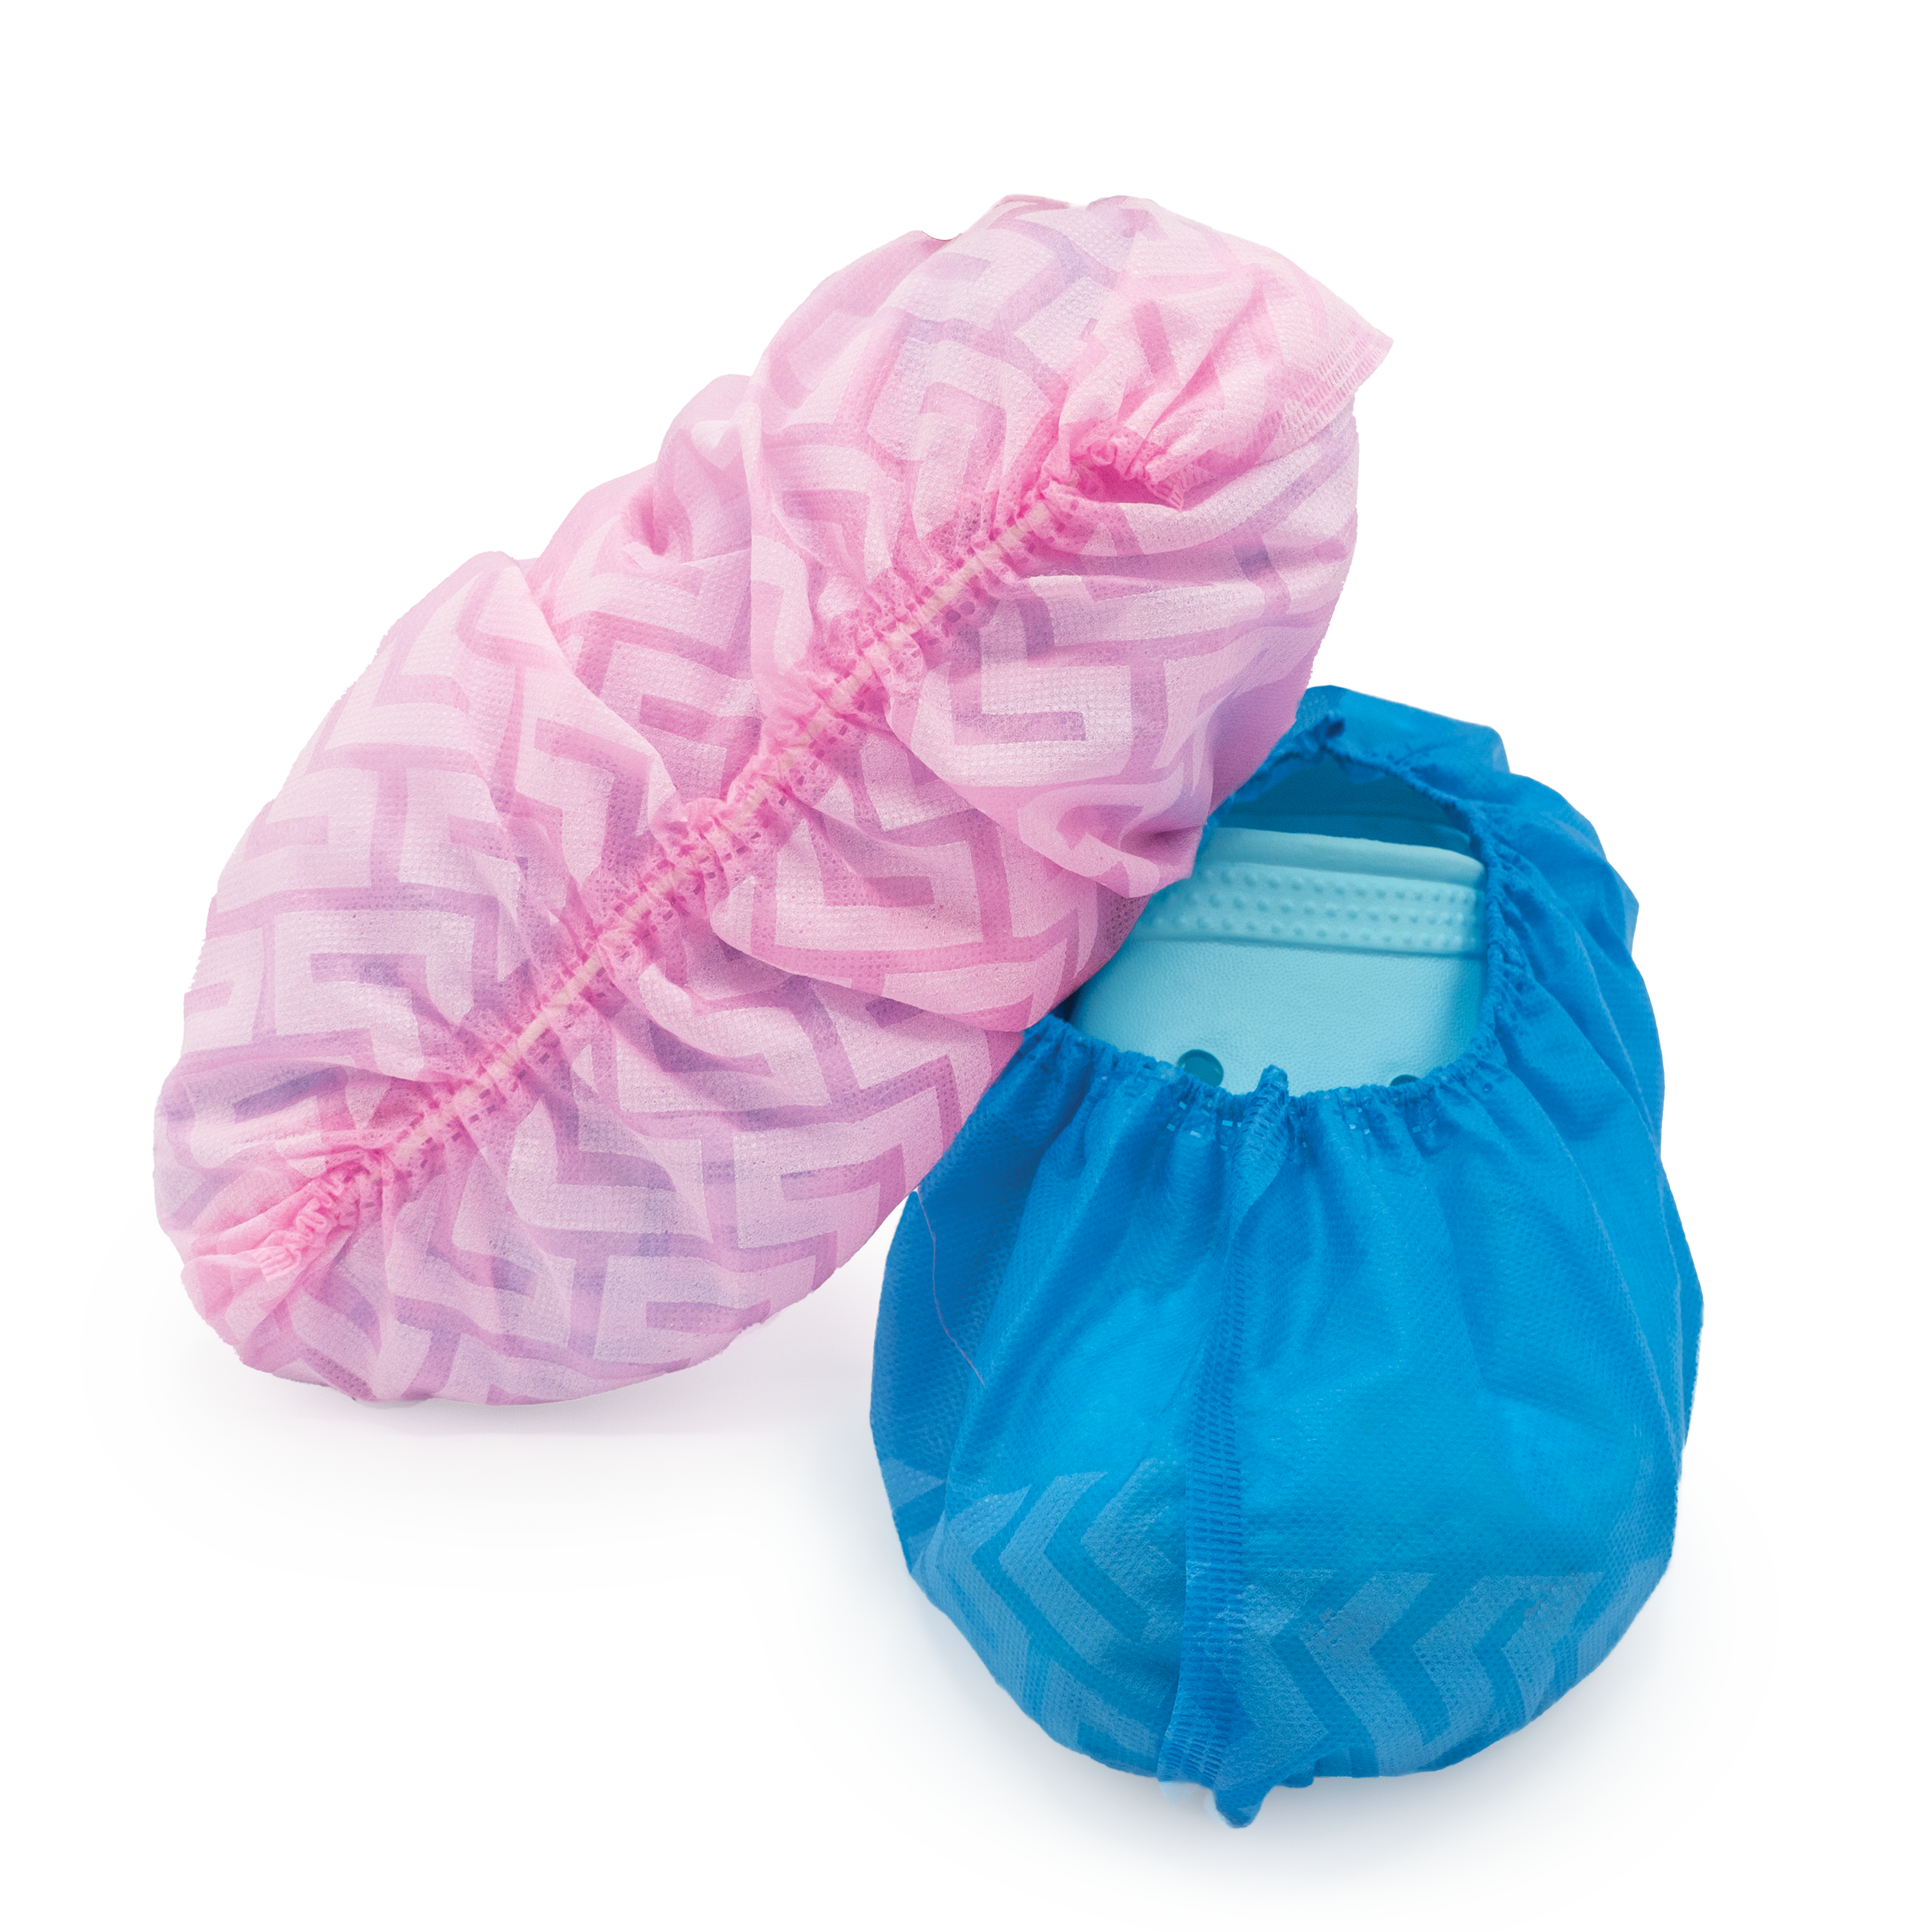 Batrik Bubble Gum Pink and Lolly Blue Disposable Shoe Covers from their new Soft Line